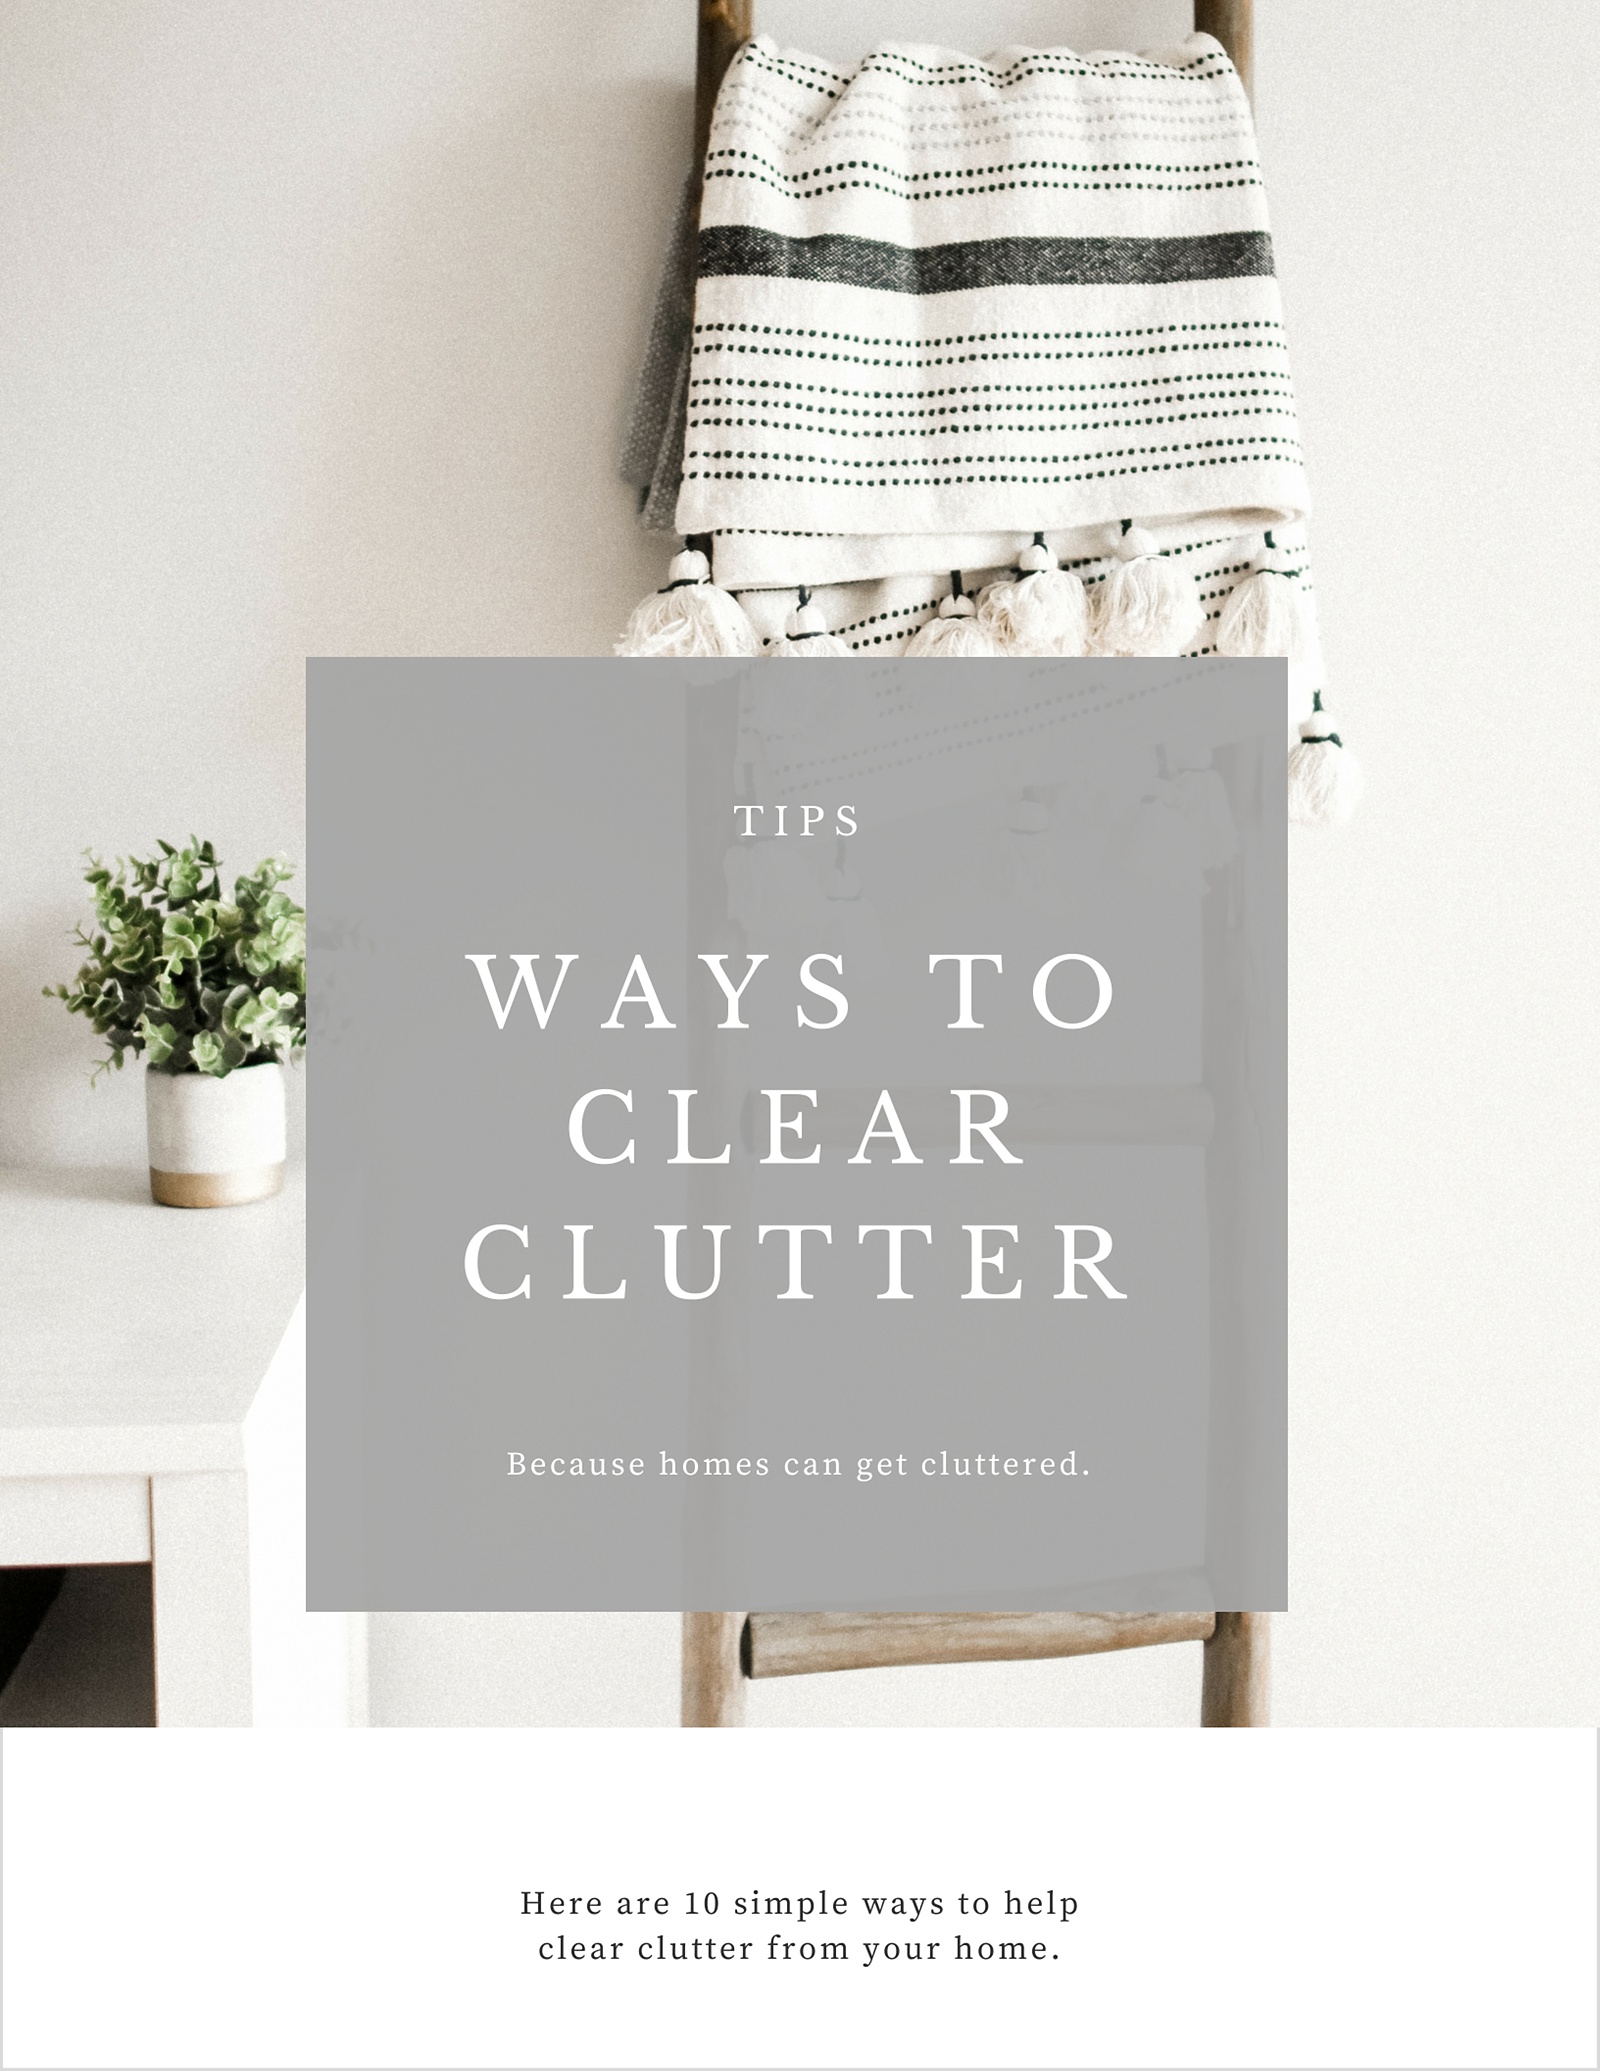 10 Ways to Clear Clutter from Your Home